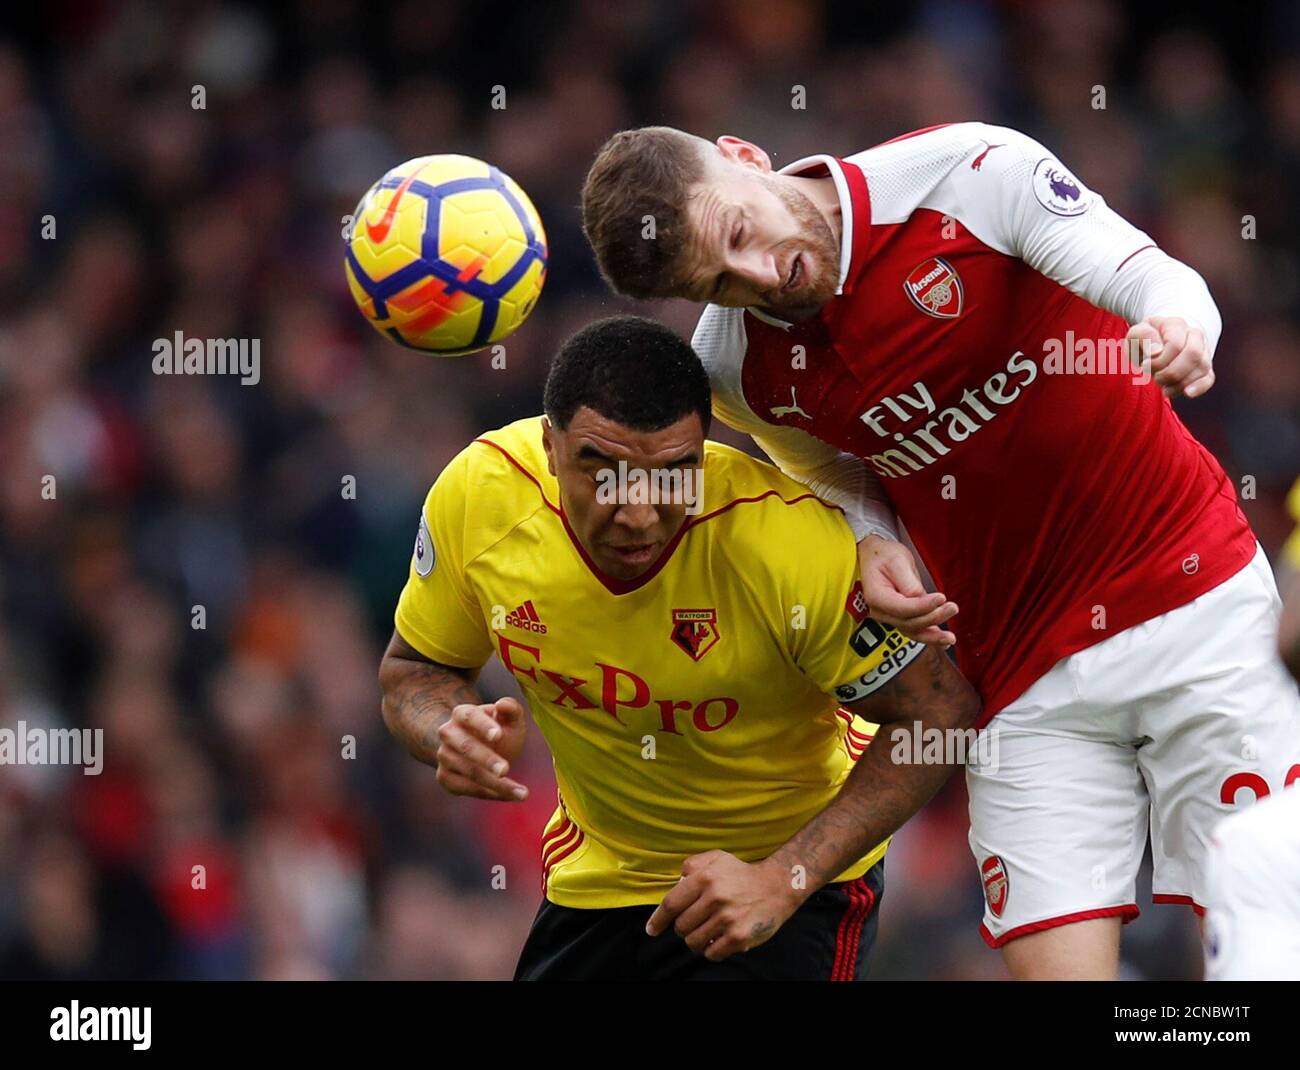 Soccer Football - Premier League - Arsenal vs Watford - Emirates Stadium, London, Britain - March 11, 2018   Watford's Troy Deeney in action with Arsenal's Shkodran Mustafi             REUTERS/Eddie Keogh    EDITORIAL USE ONLY. No use with unauthorized audio, video, data, fixture lists, club/league logos or "live" services. Online in-match use limited to 75 images, no video emulation. No use in betting, games or single club/league/player publications.  Please contact your account representative for further details. Stock Photo